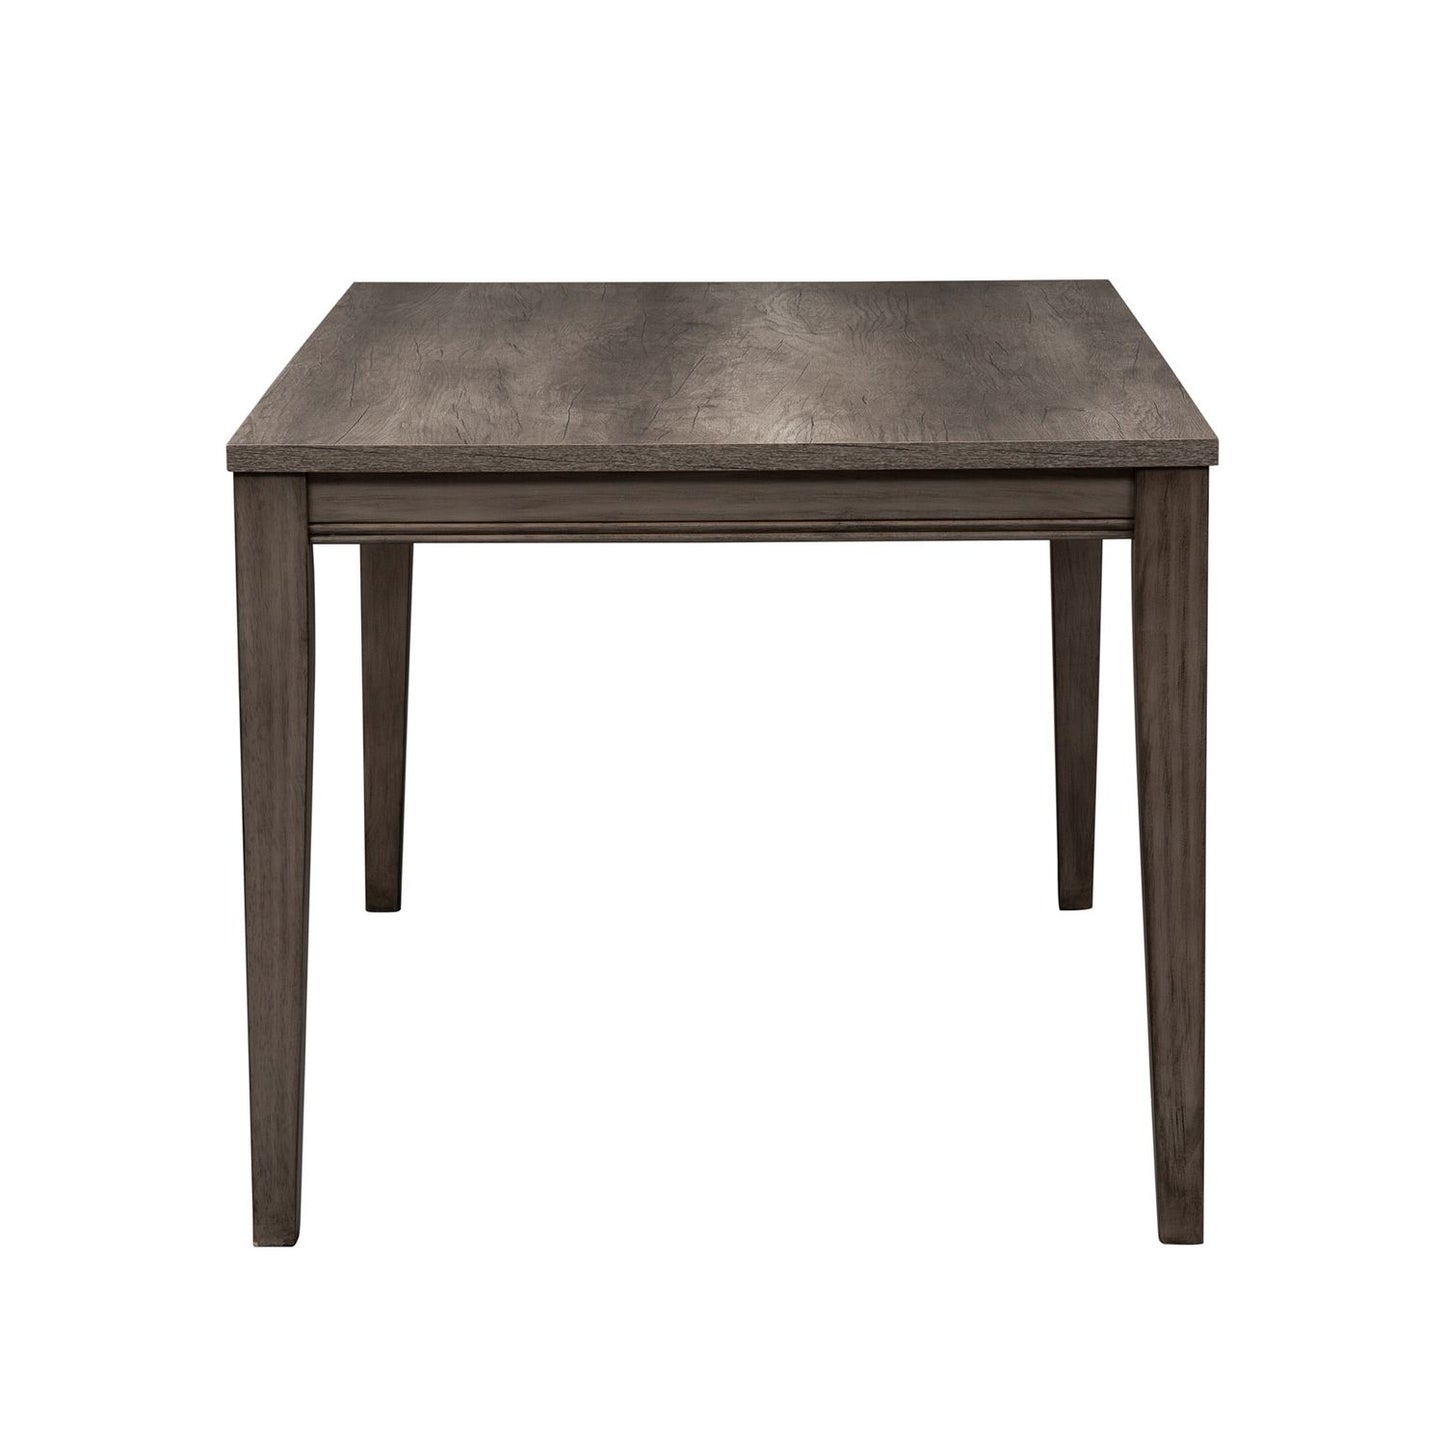 Tanners Creek Dining Table Greystone Finish